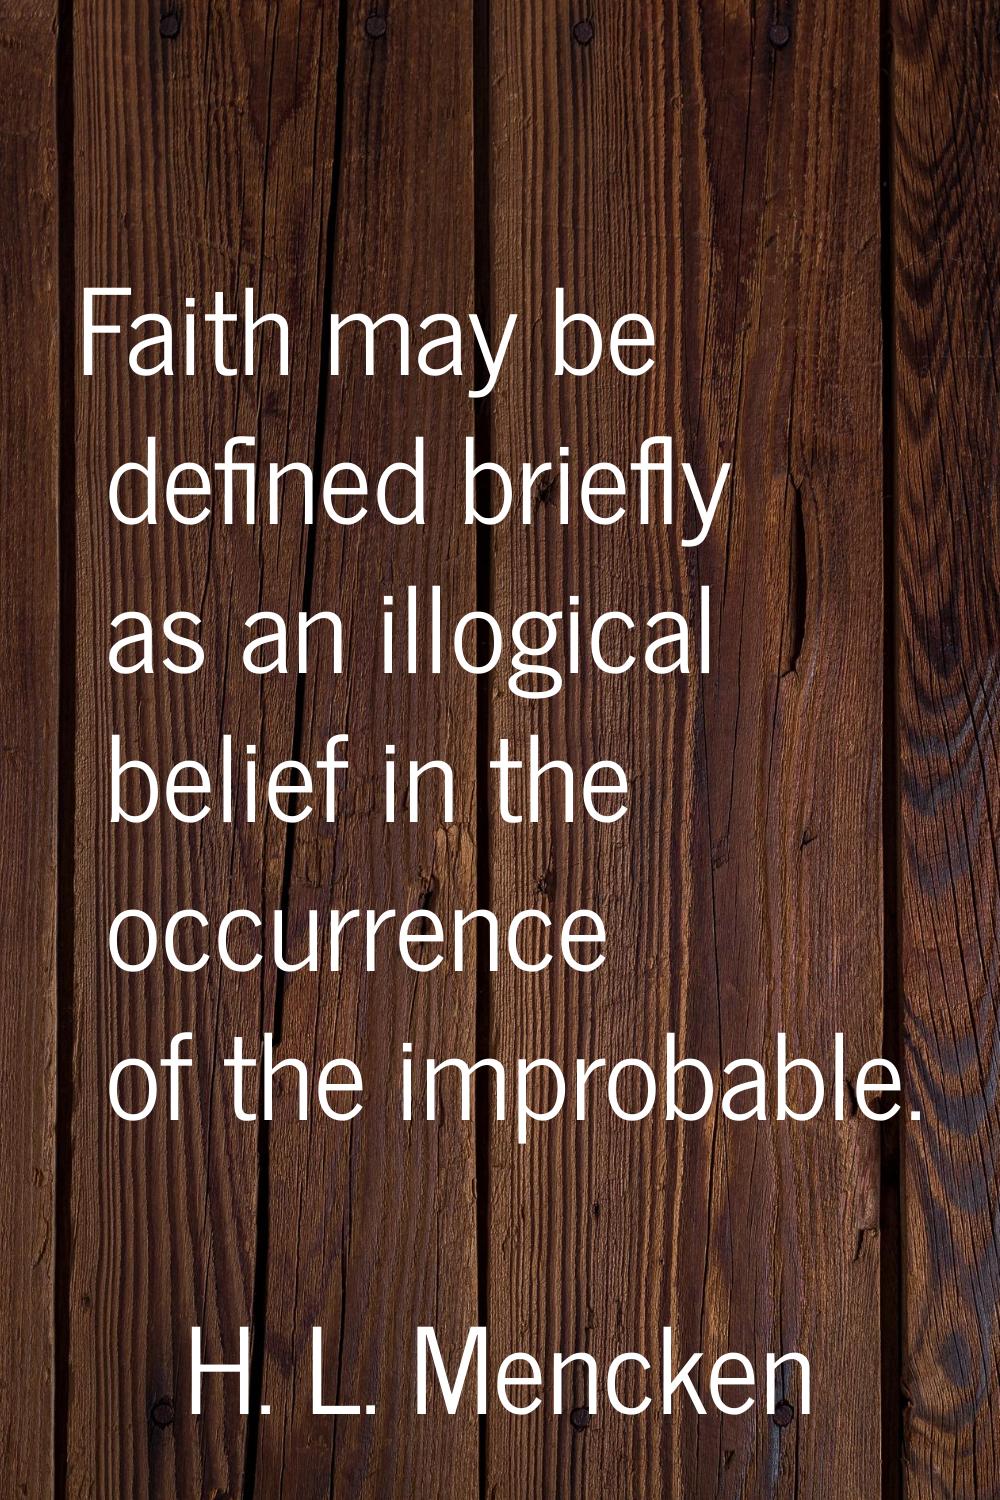 Faith may be defined briefly as an illogical belief in the occurrence of the improbable.